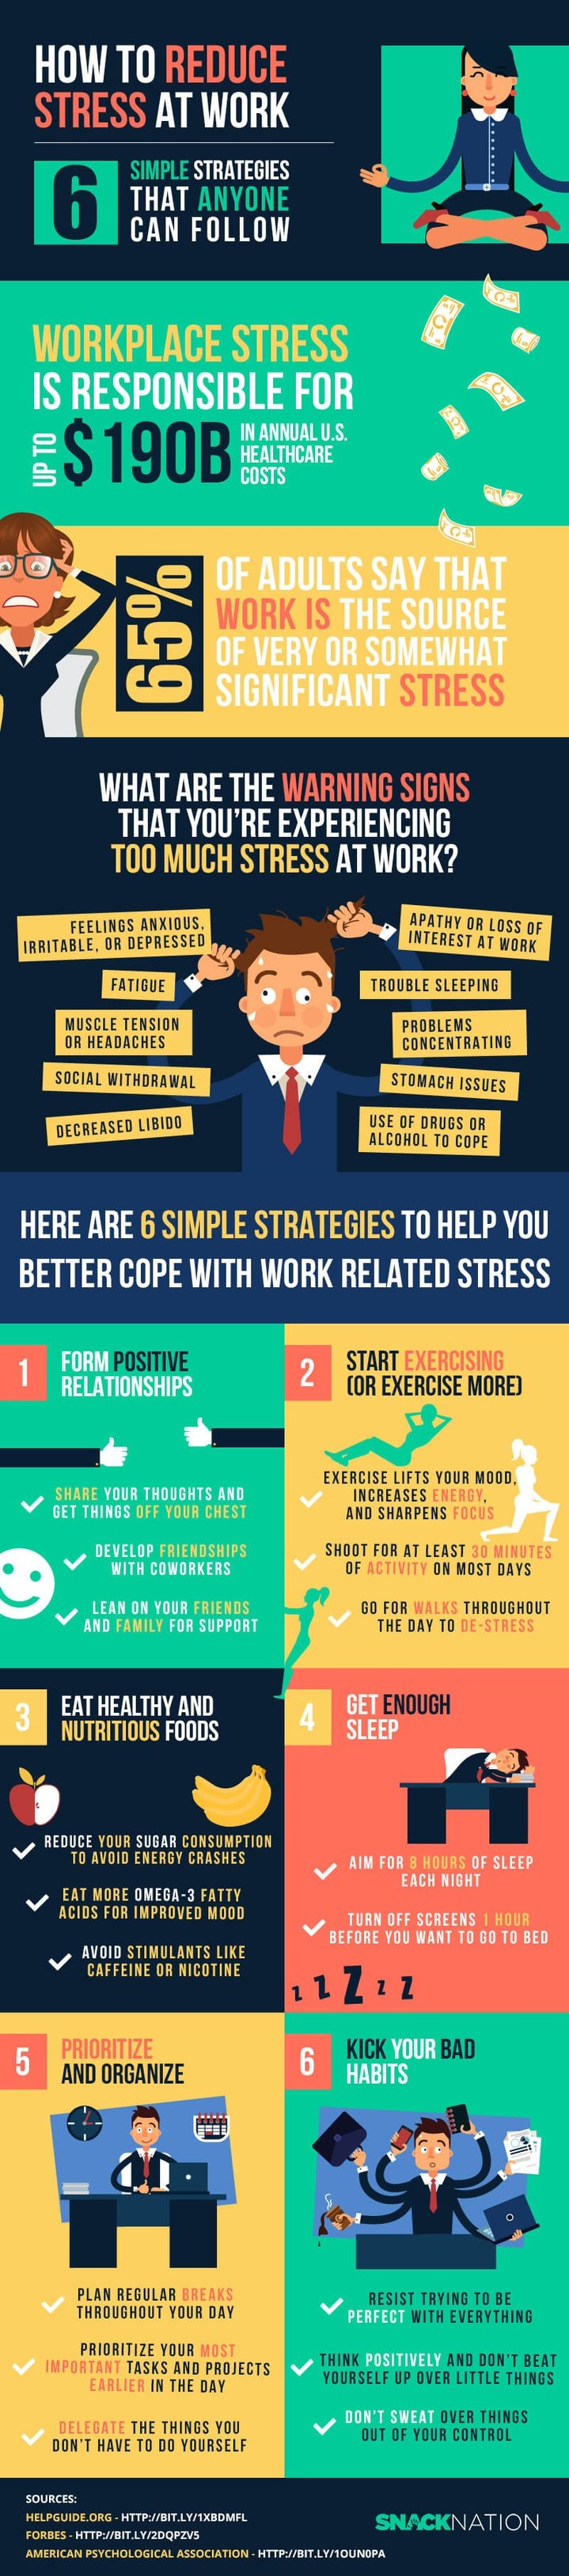 How-to-reduce-stress-at-work.jpg